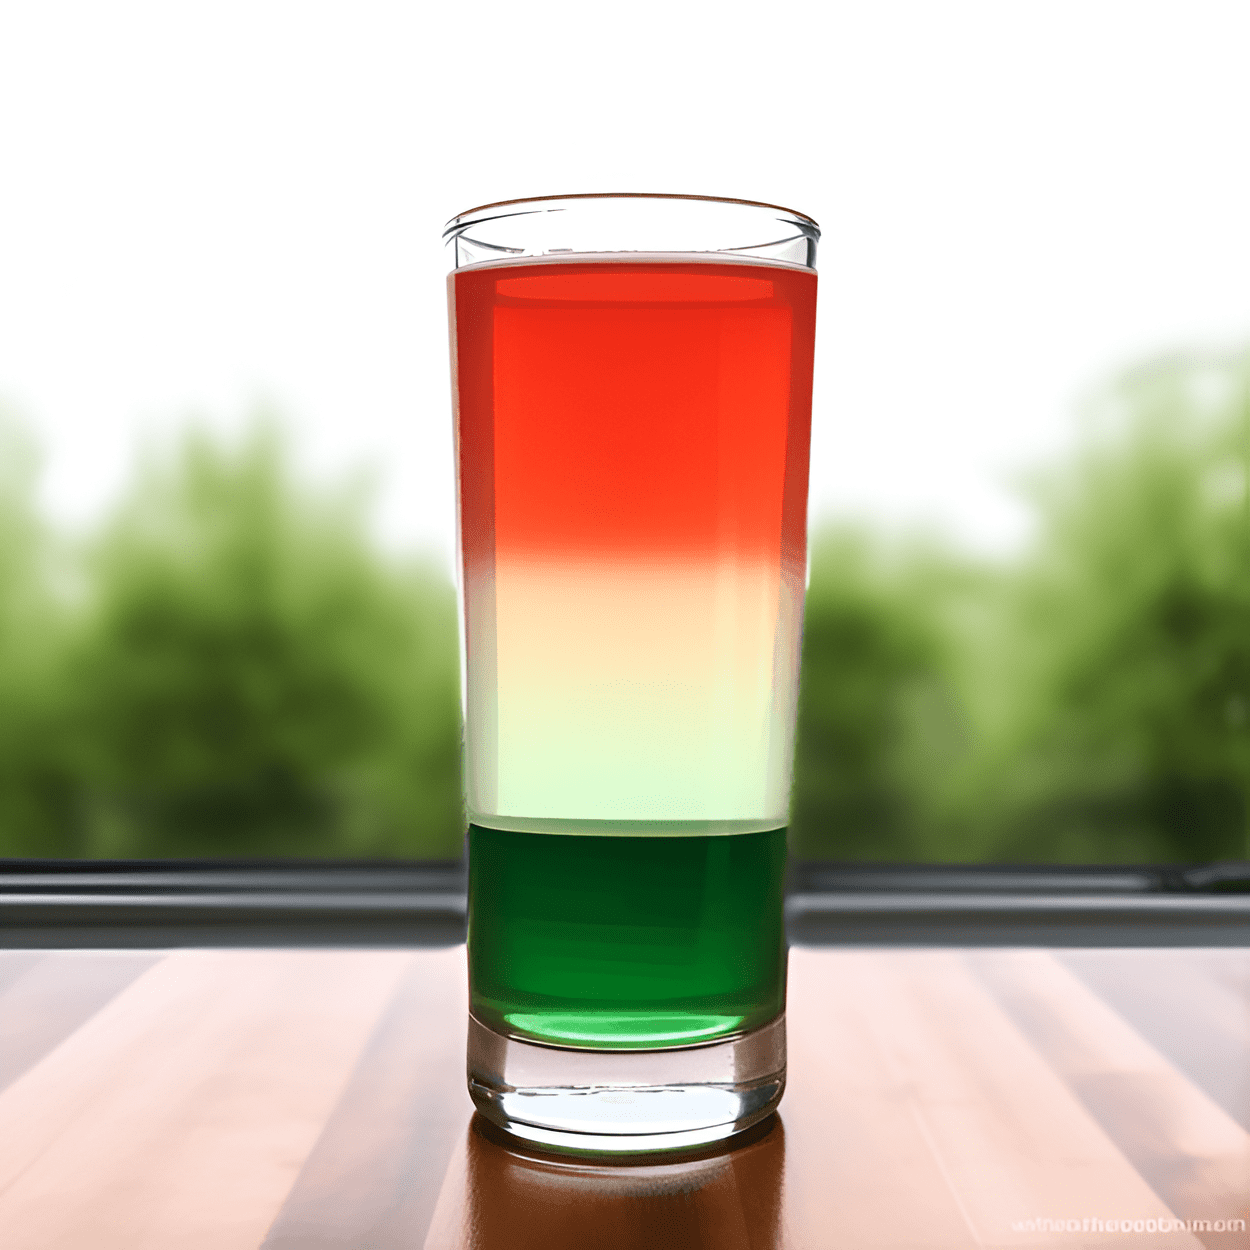 Mexican Flag Cocktail Recipe - The Mexican Flag is a layered cocktail with a complex taste profile. The lime juice provides a tangy sourness, the tequila gives a strong alcoholic kick, and the grenadine adds a sweet and fruity finish.